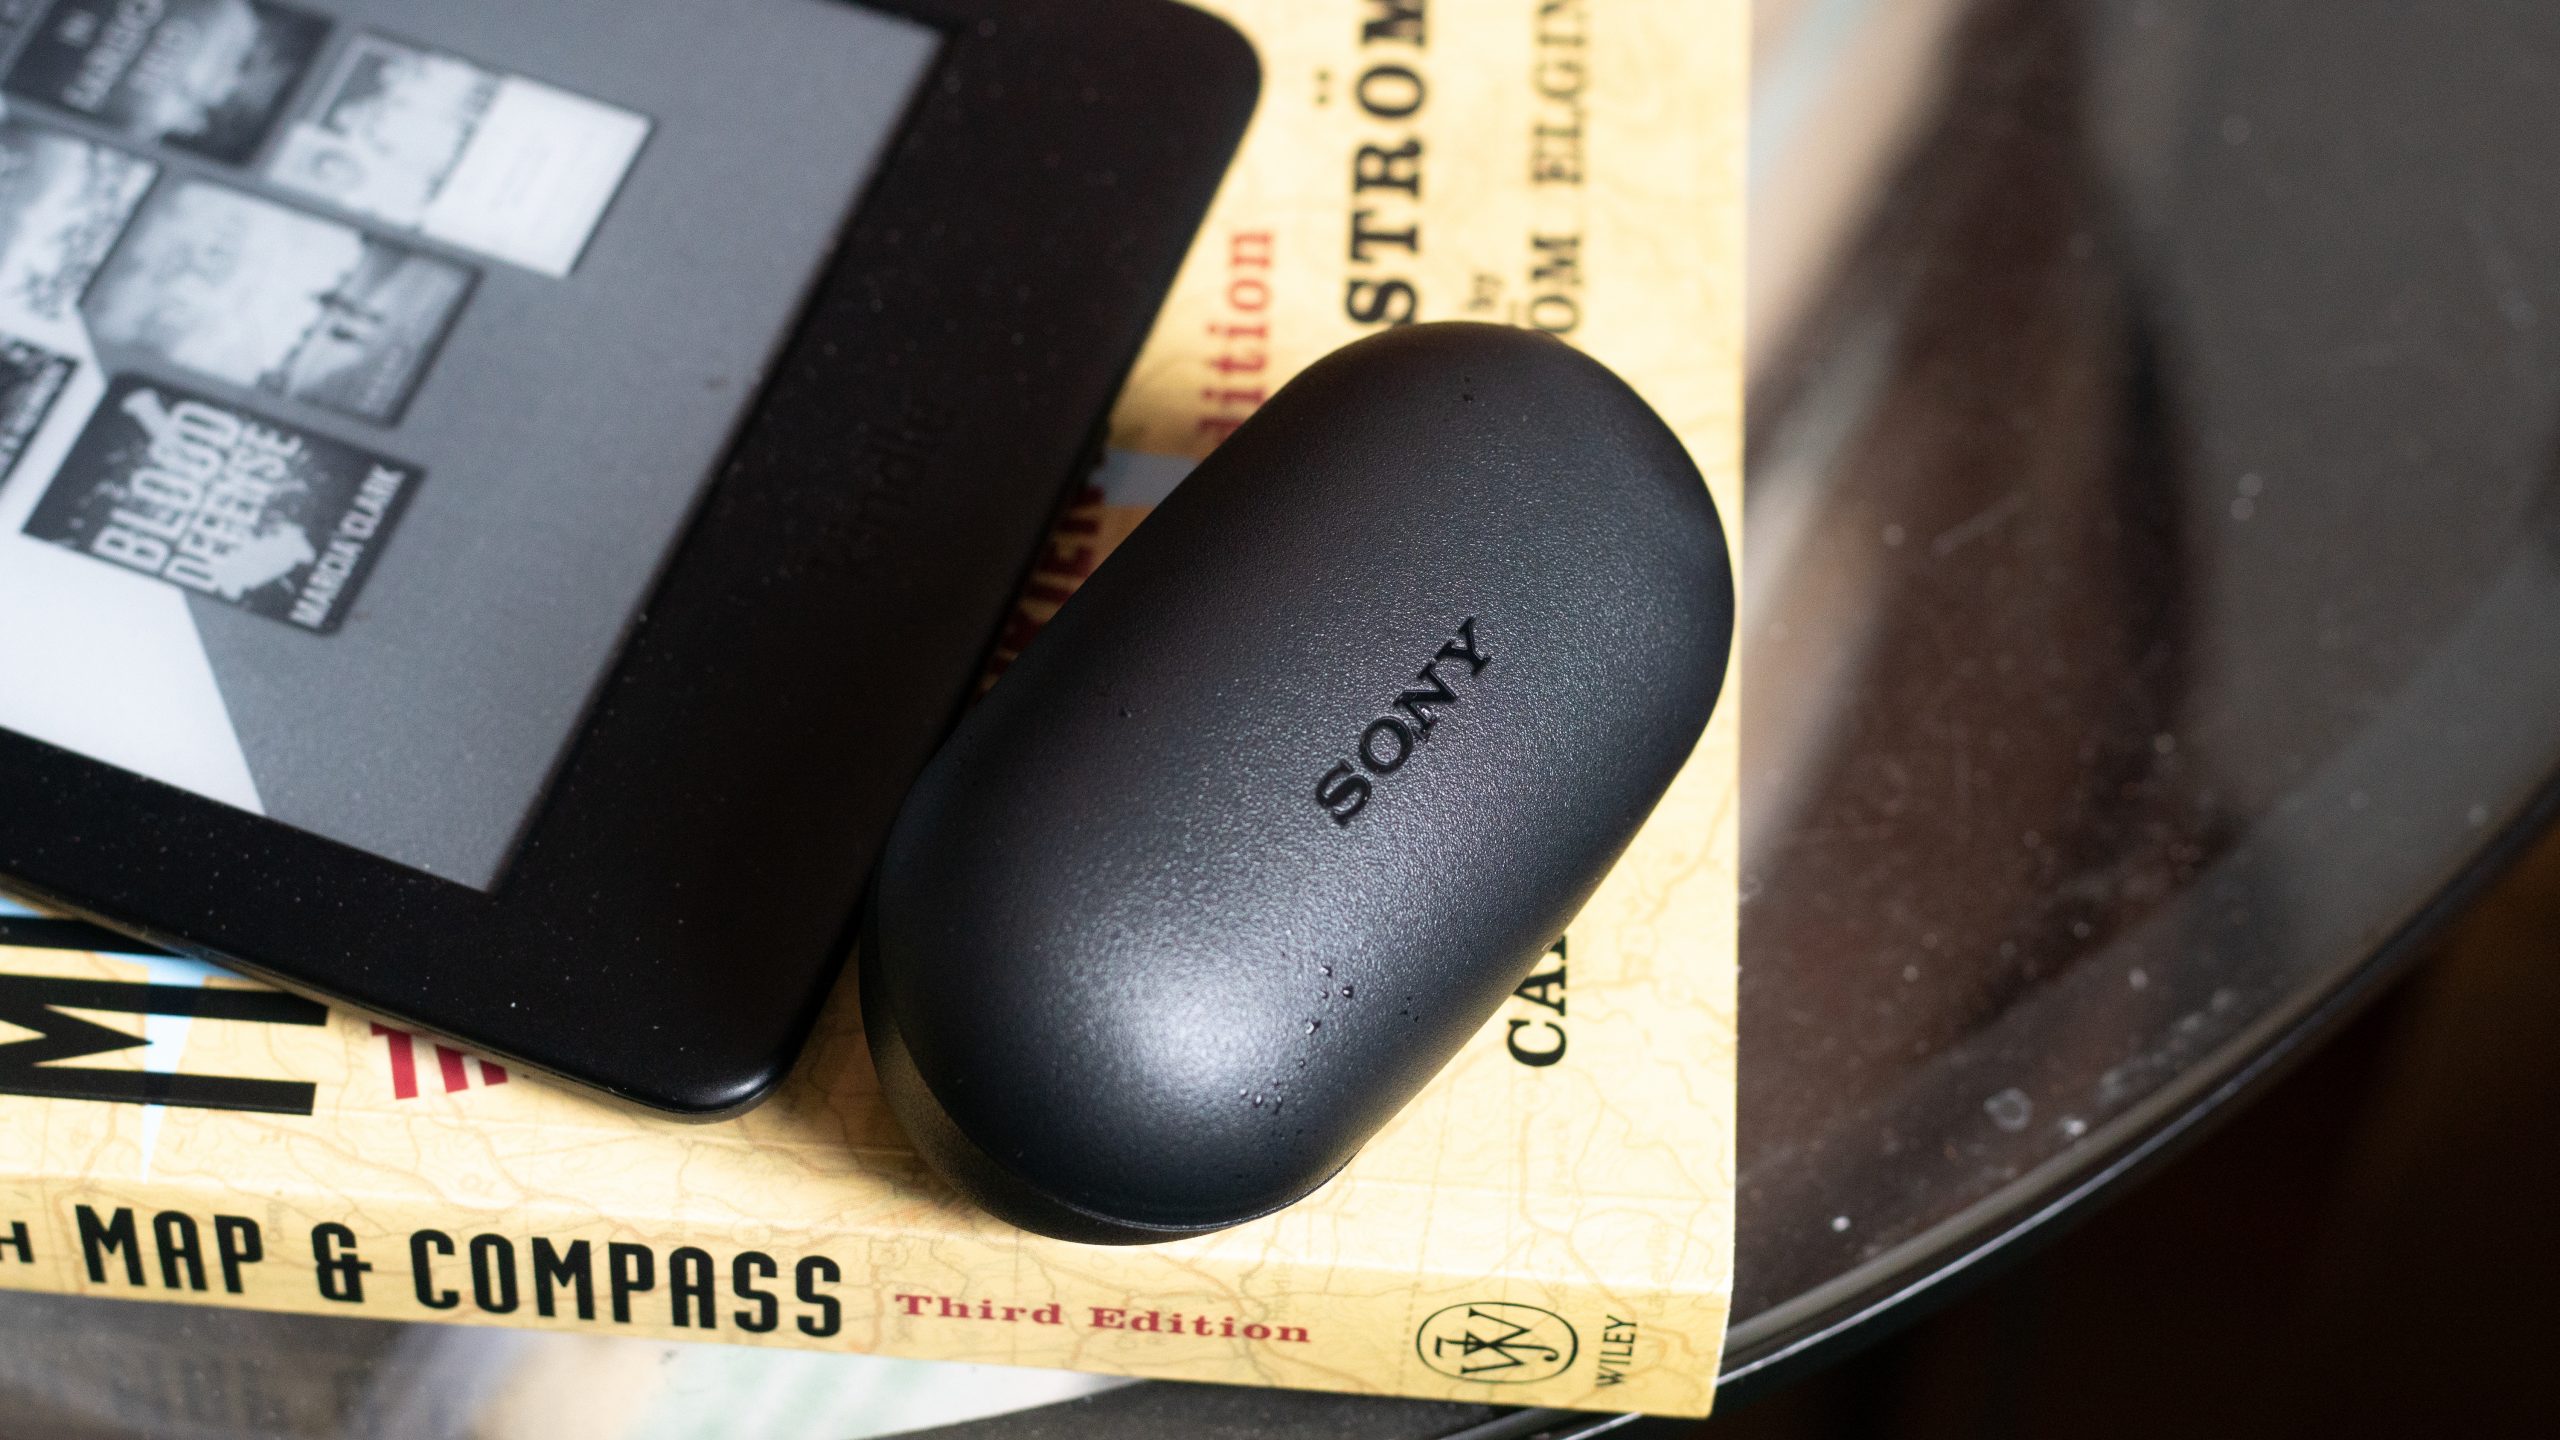 Sony WF-XB700 true wireless earbuds charging case on a book next to a kindle